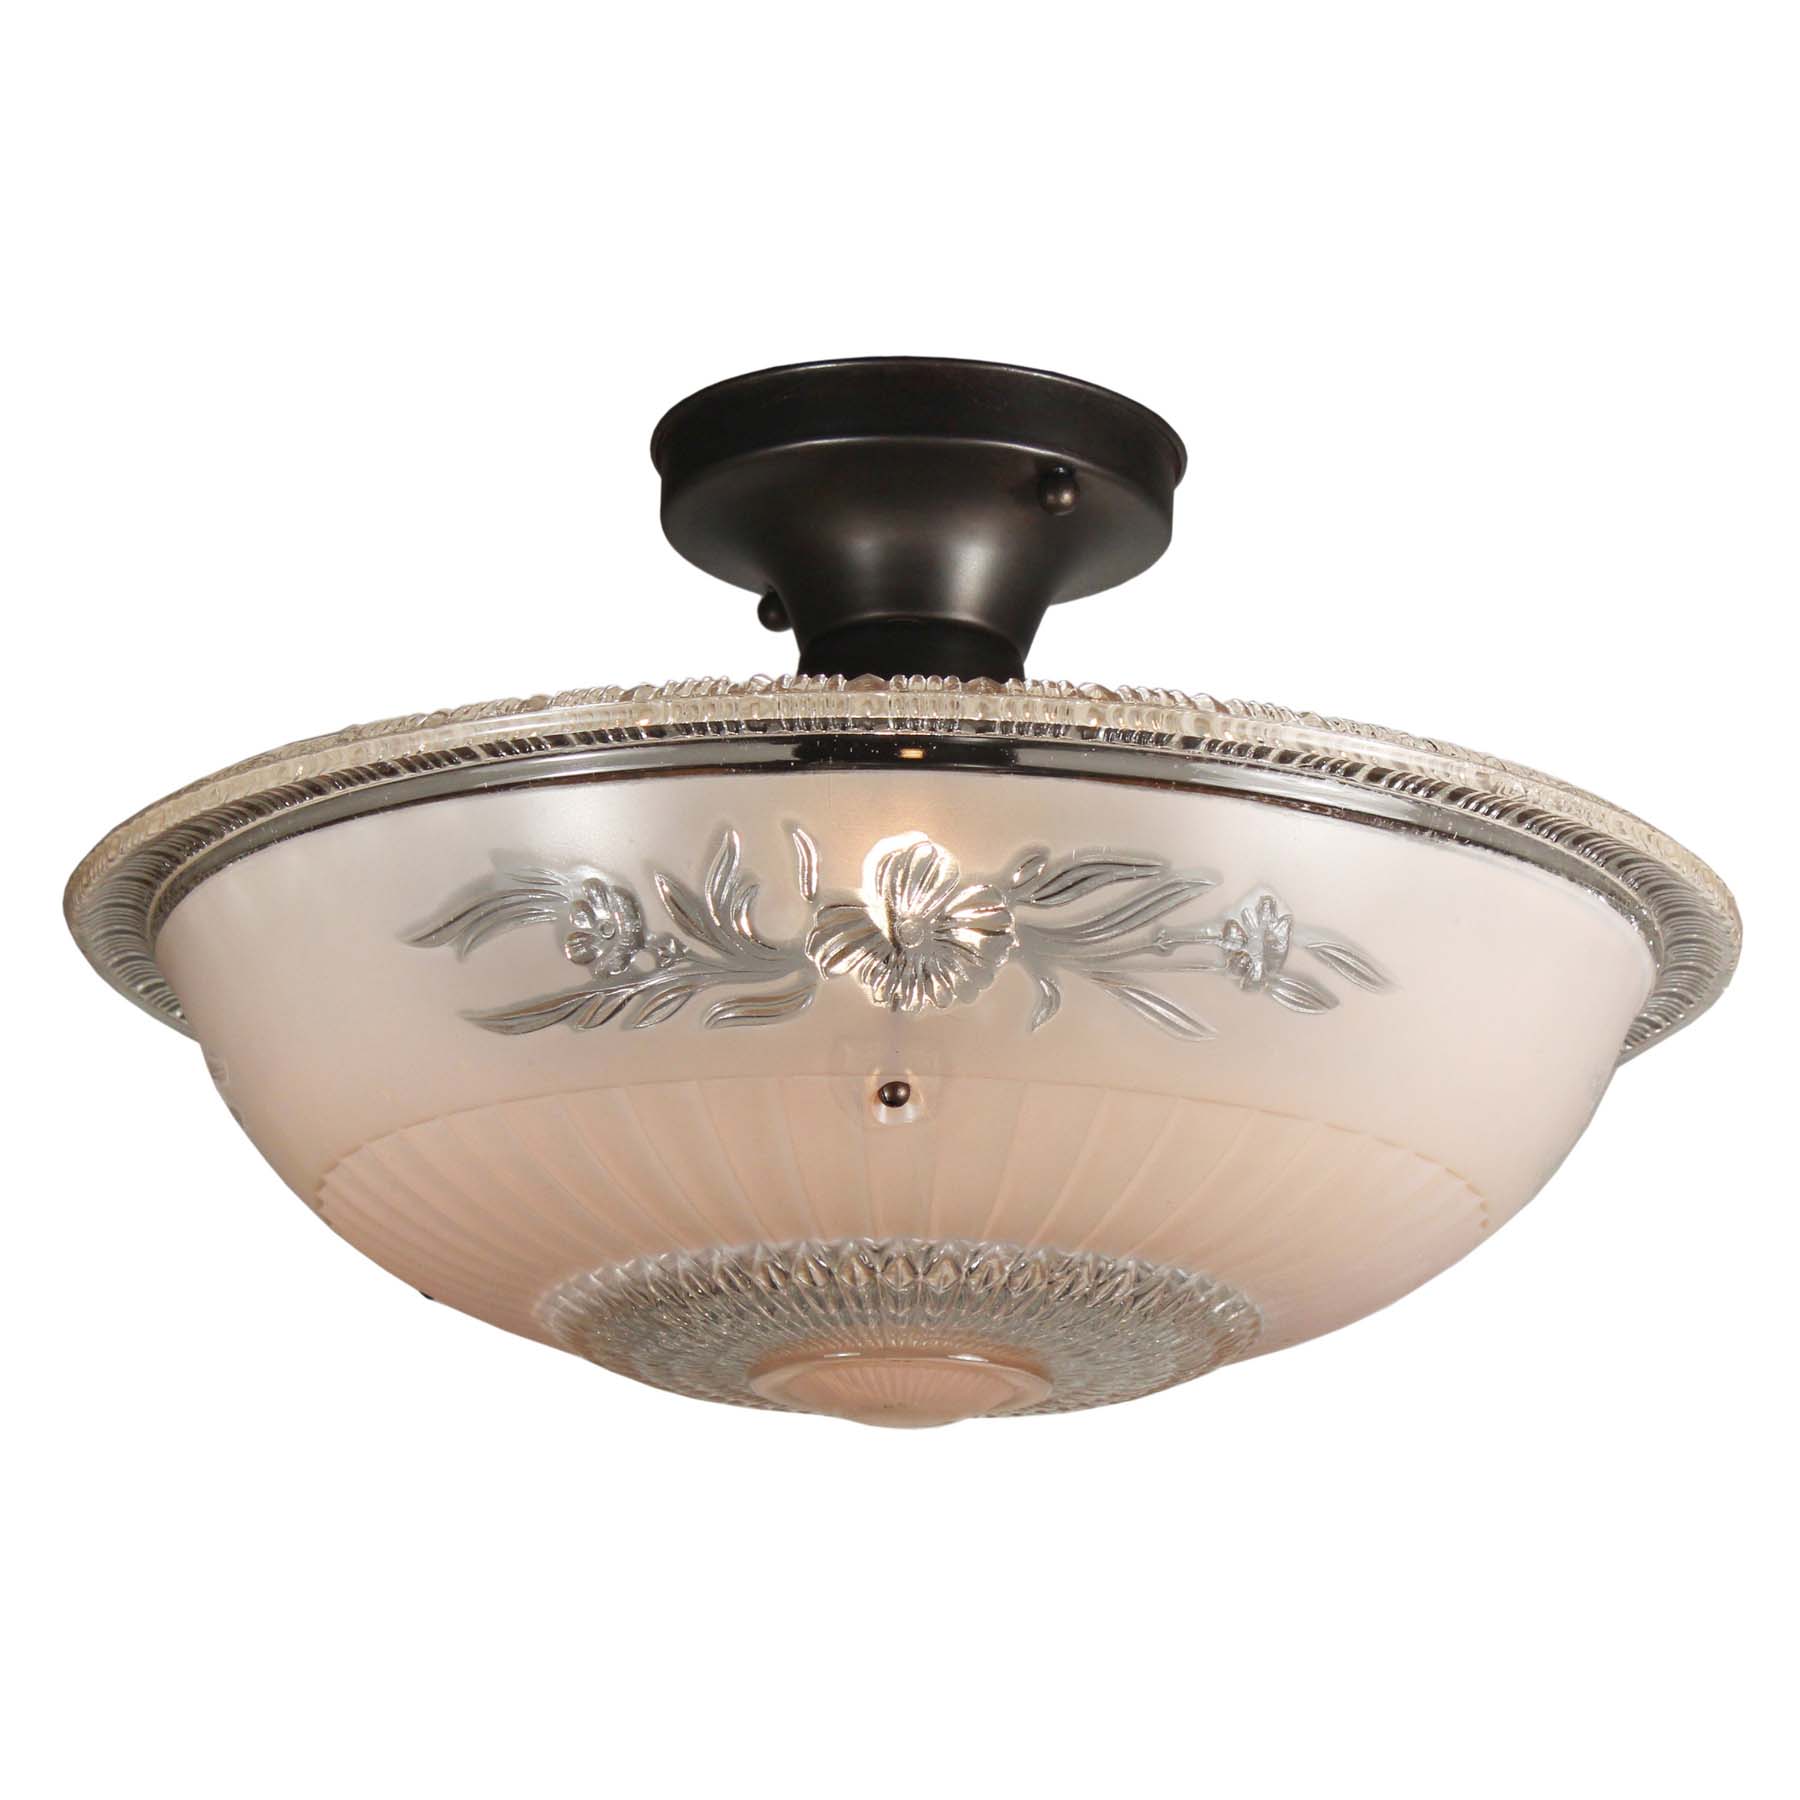 SOLD Vintage Flush Mount Light Fixture with Pale Pink Glass Shade, c.1940-0